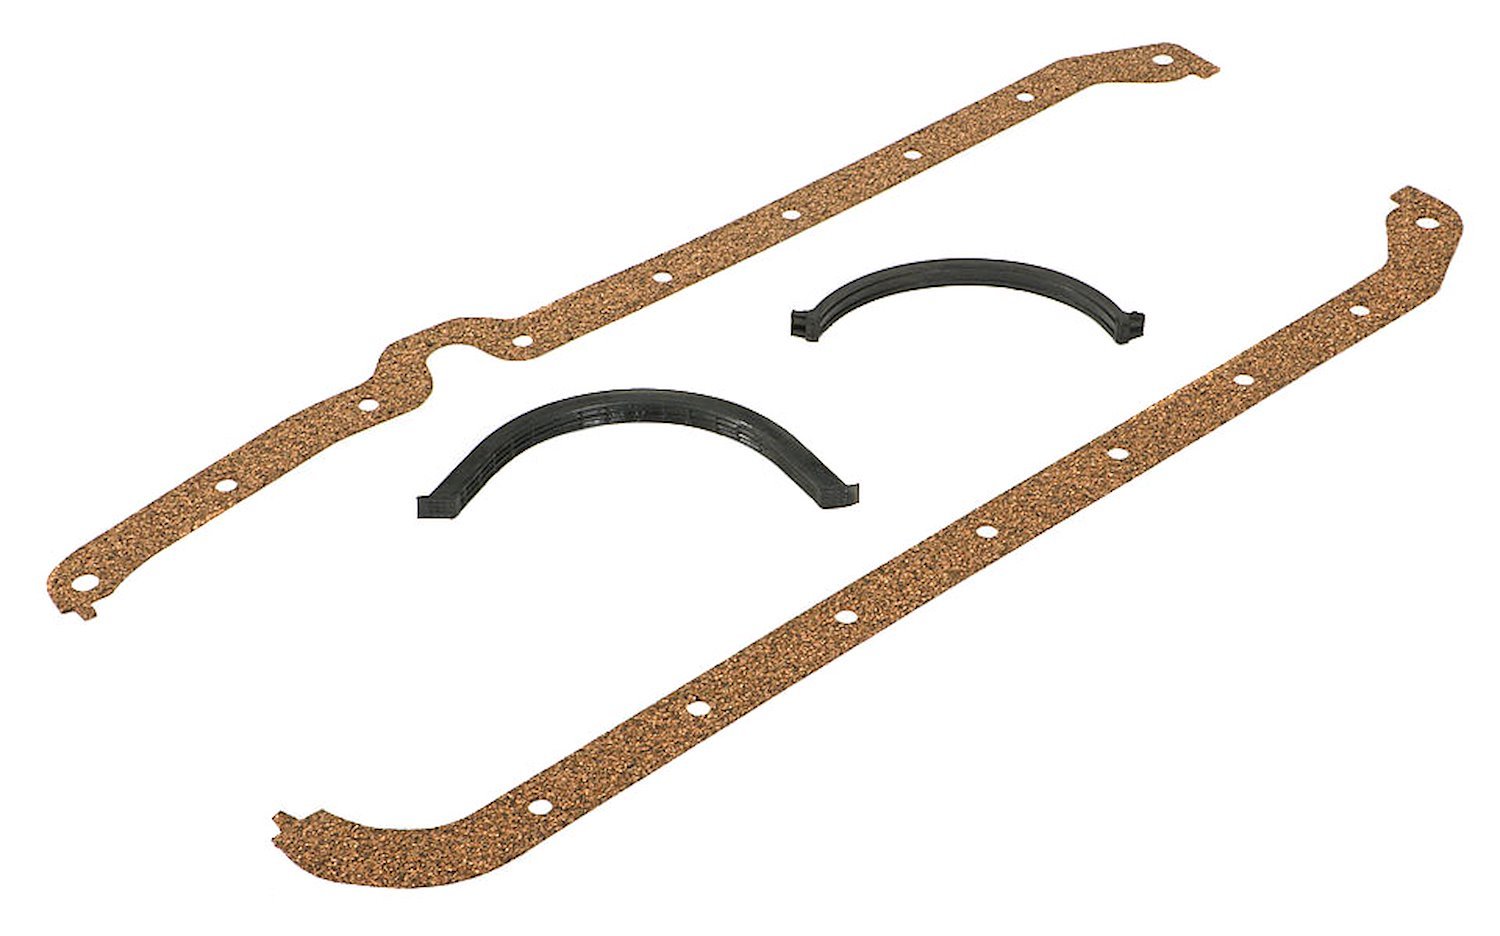 OE Style Oil Pan Gasket 1979-85 Small Block Chevy 305-350